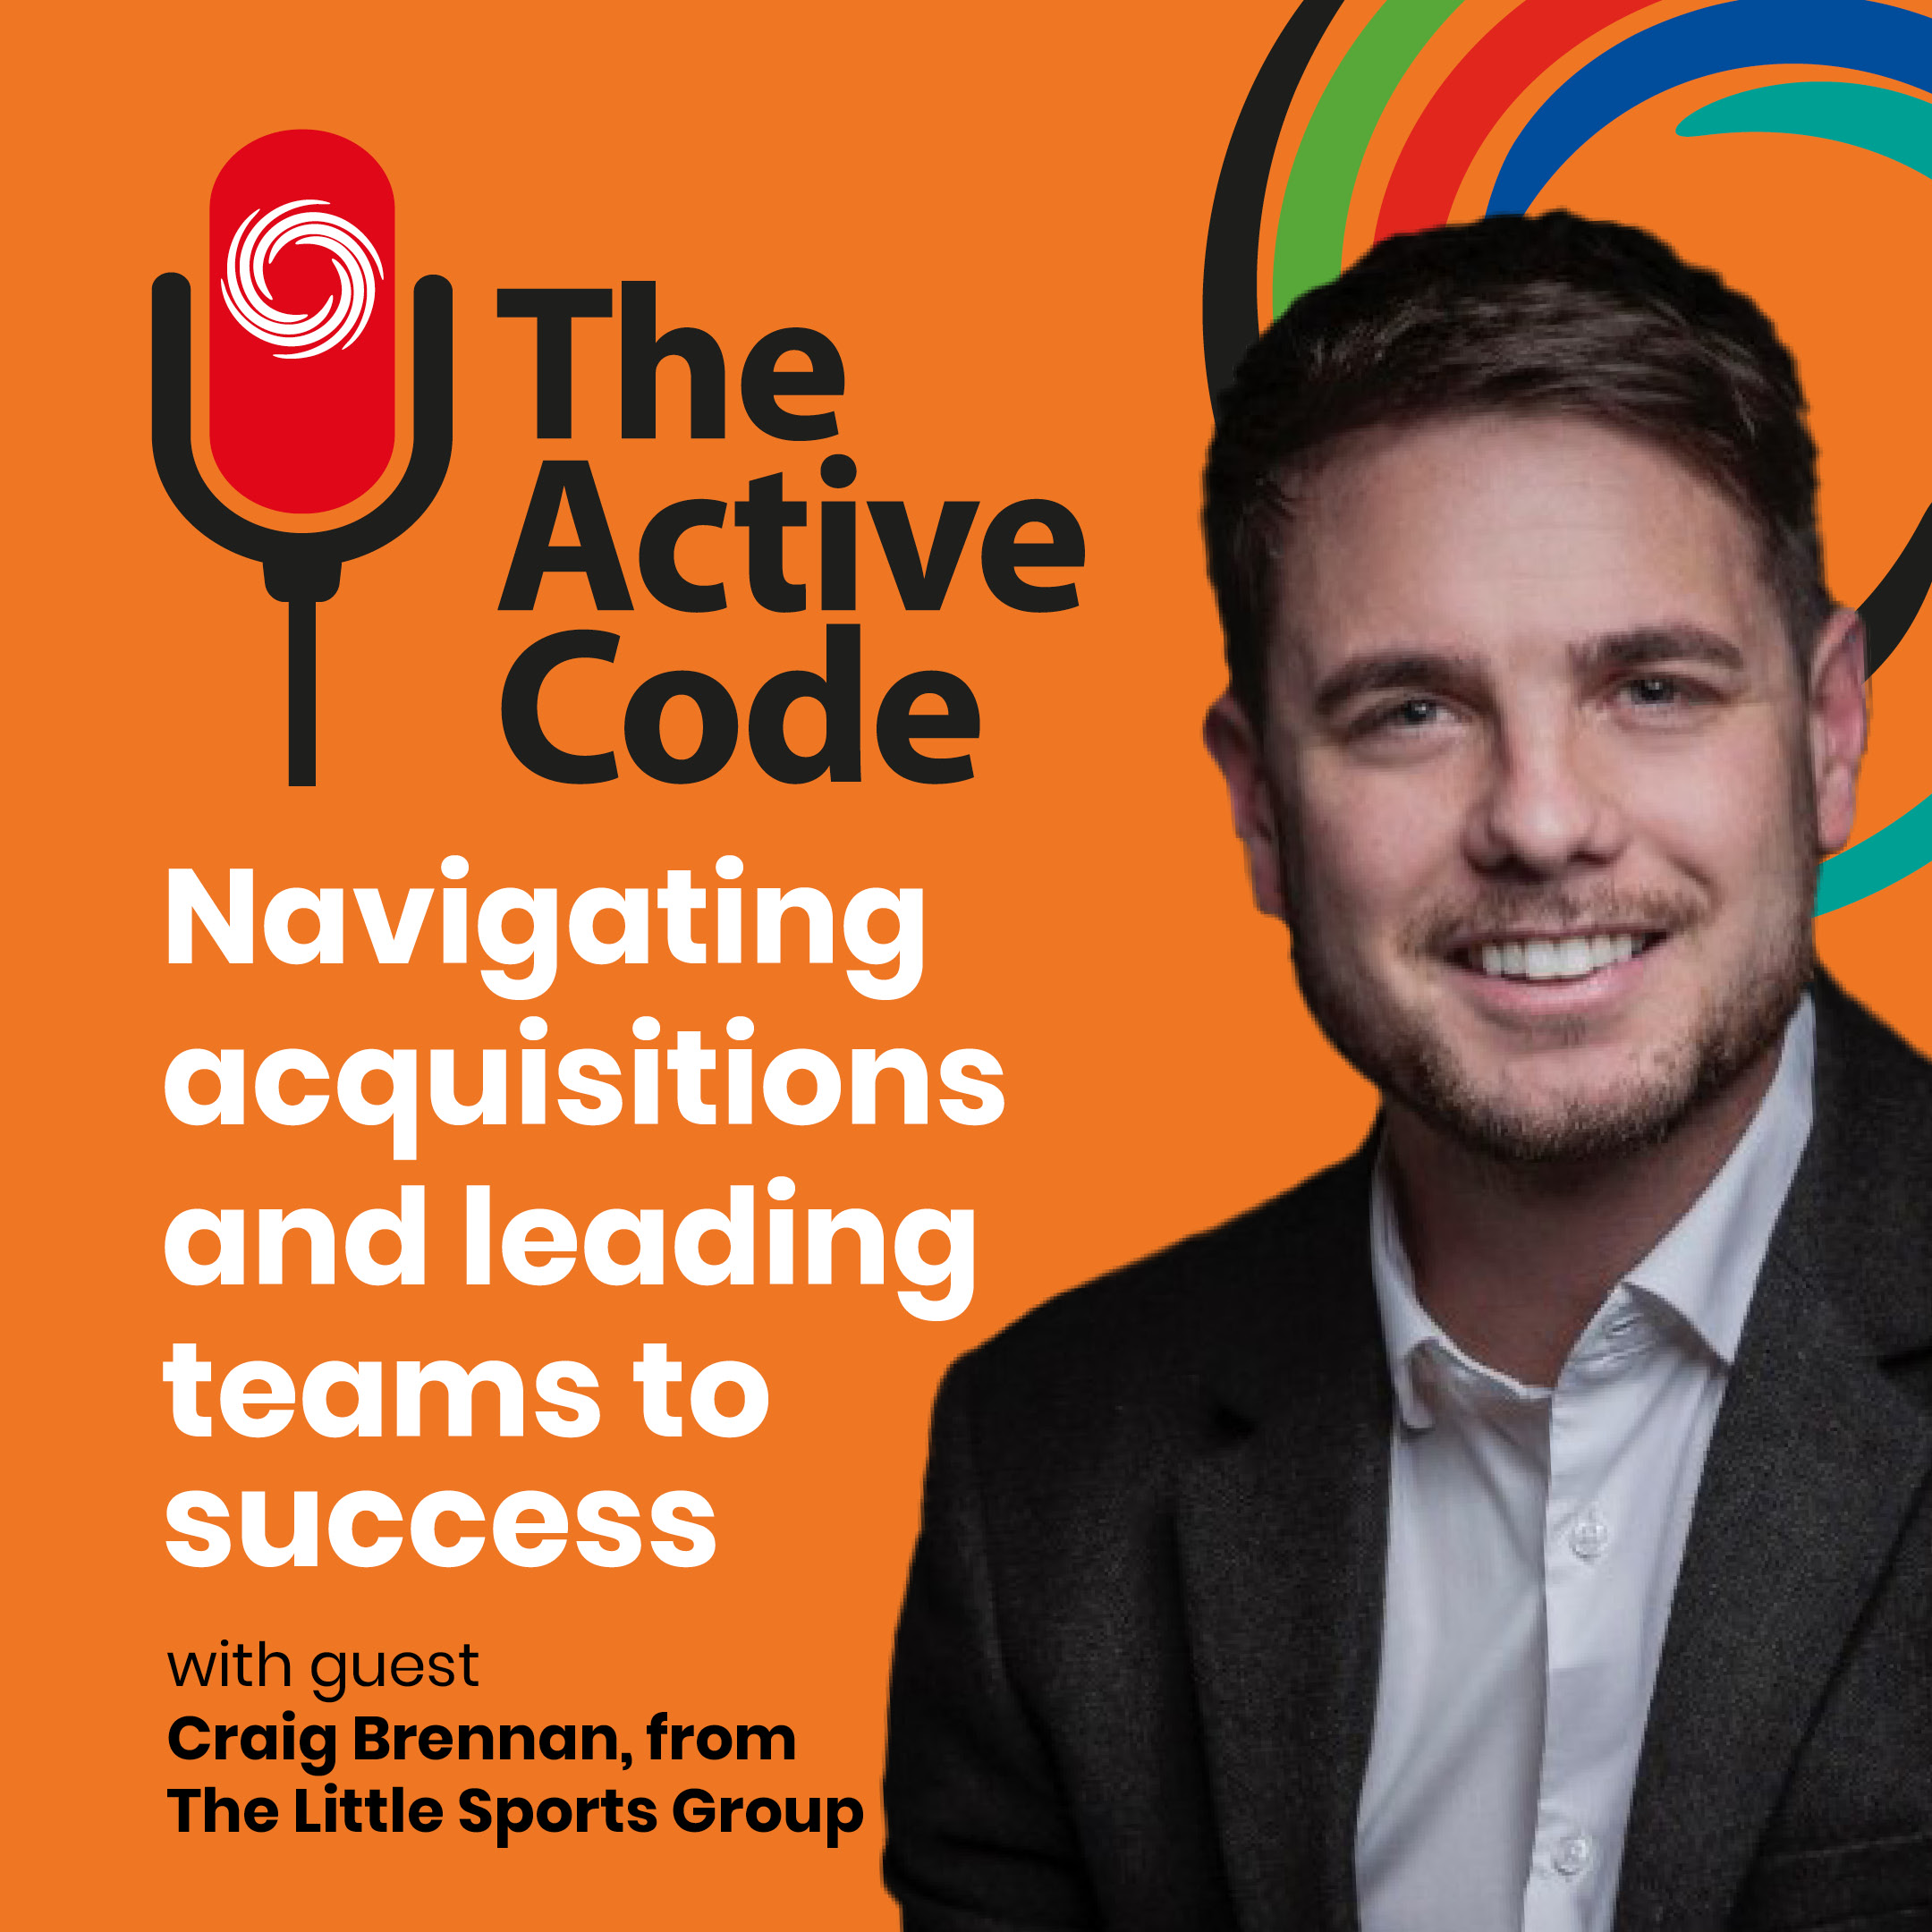 The Active Code – Navigating acquisitions and leading teams to success